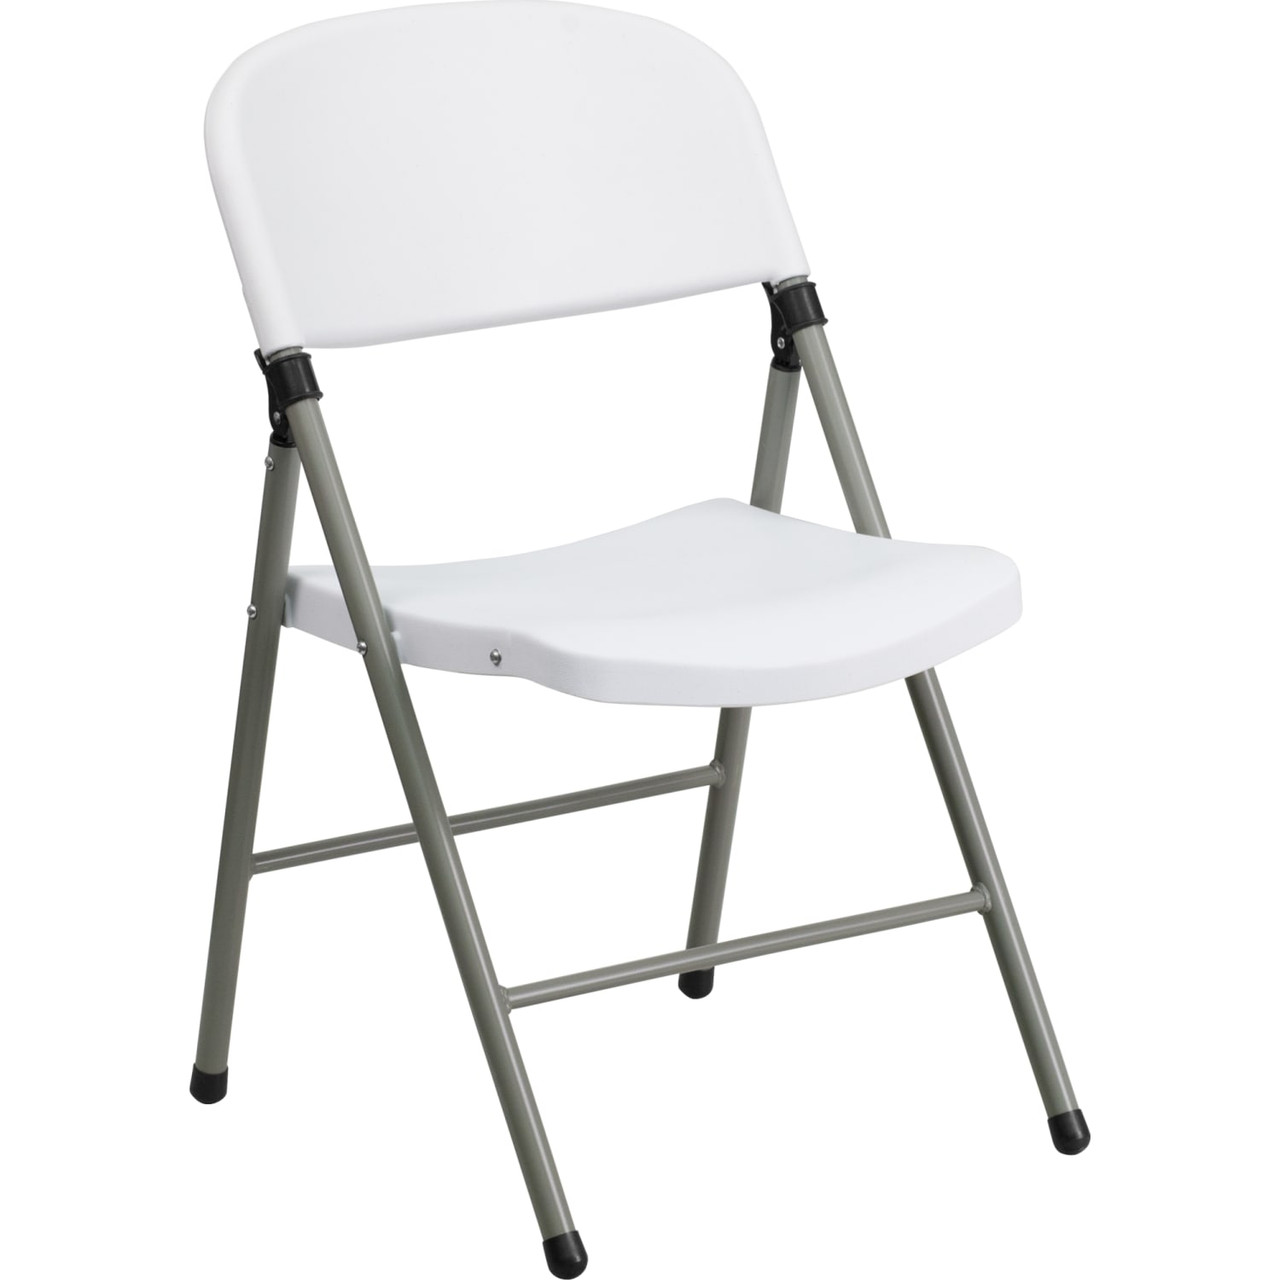 Hercules  Series White Plastic Folding Chairs | Set of 2 Lightweight Folding Chairs with Gray Frame